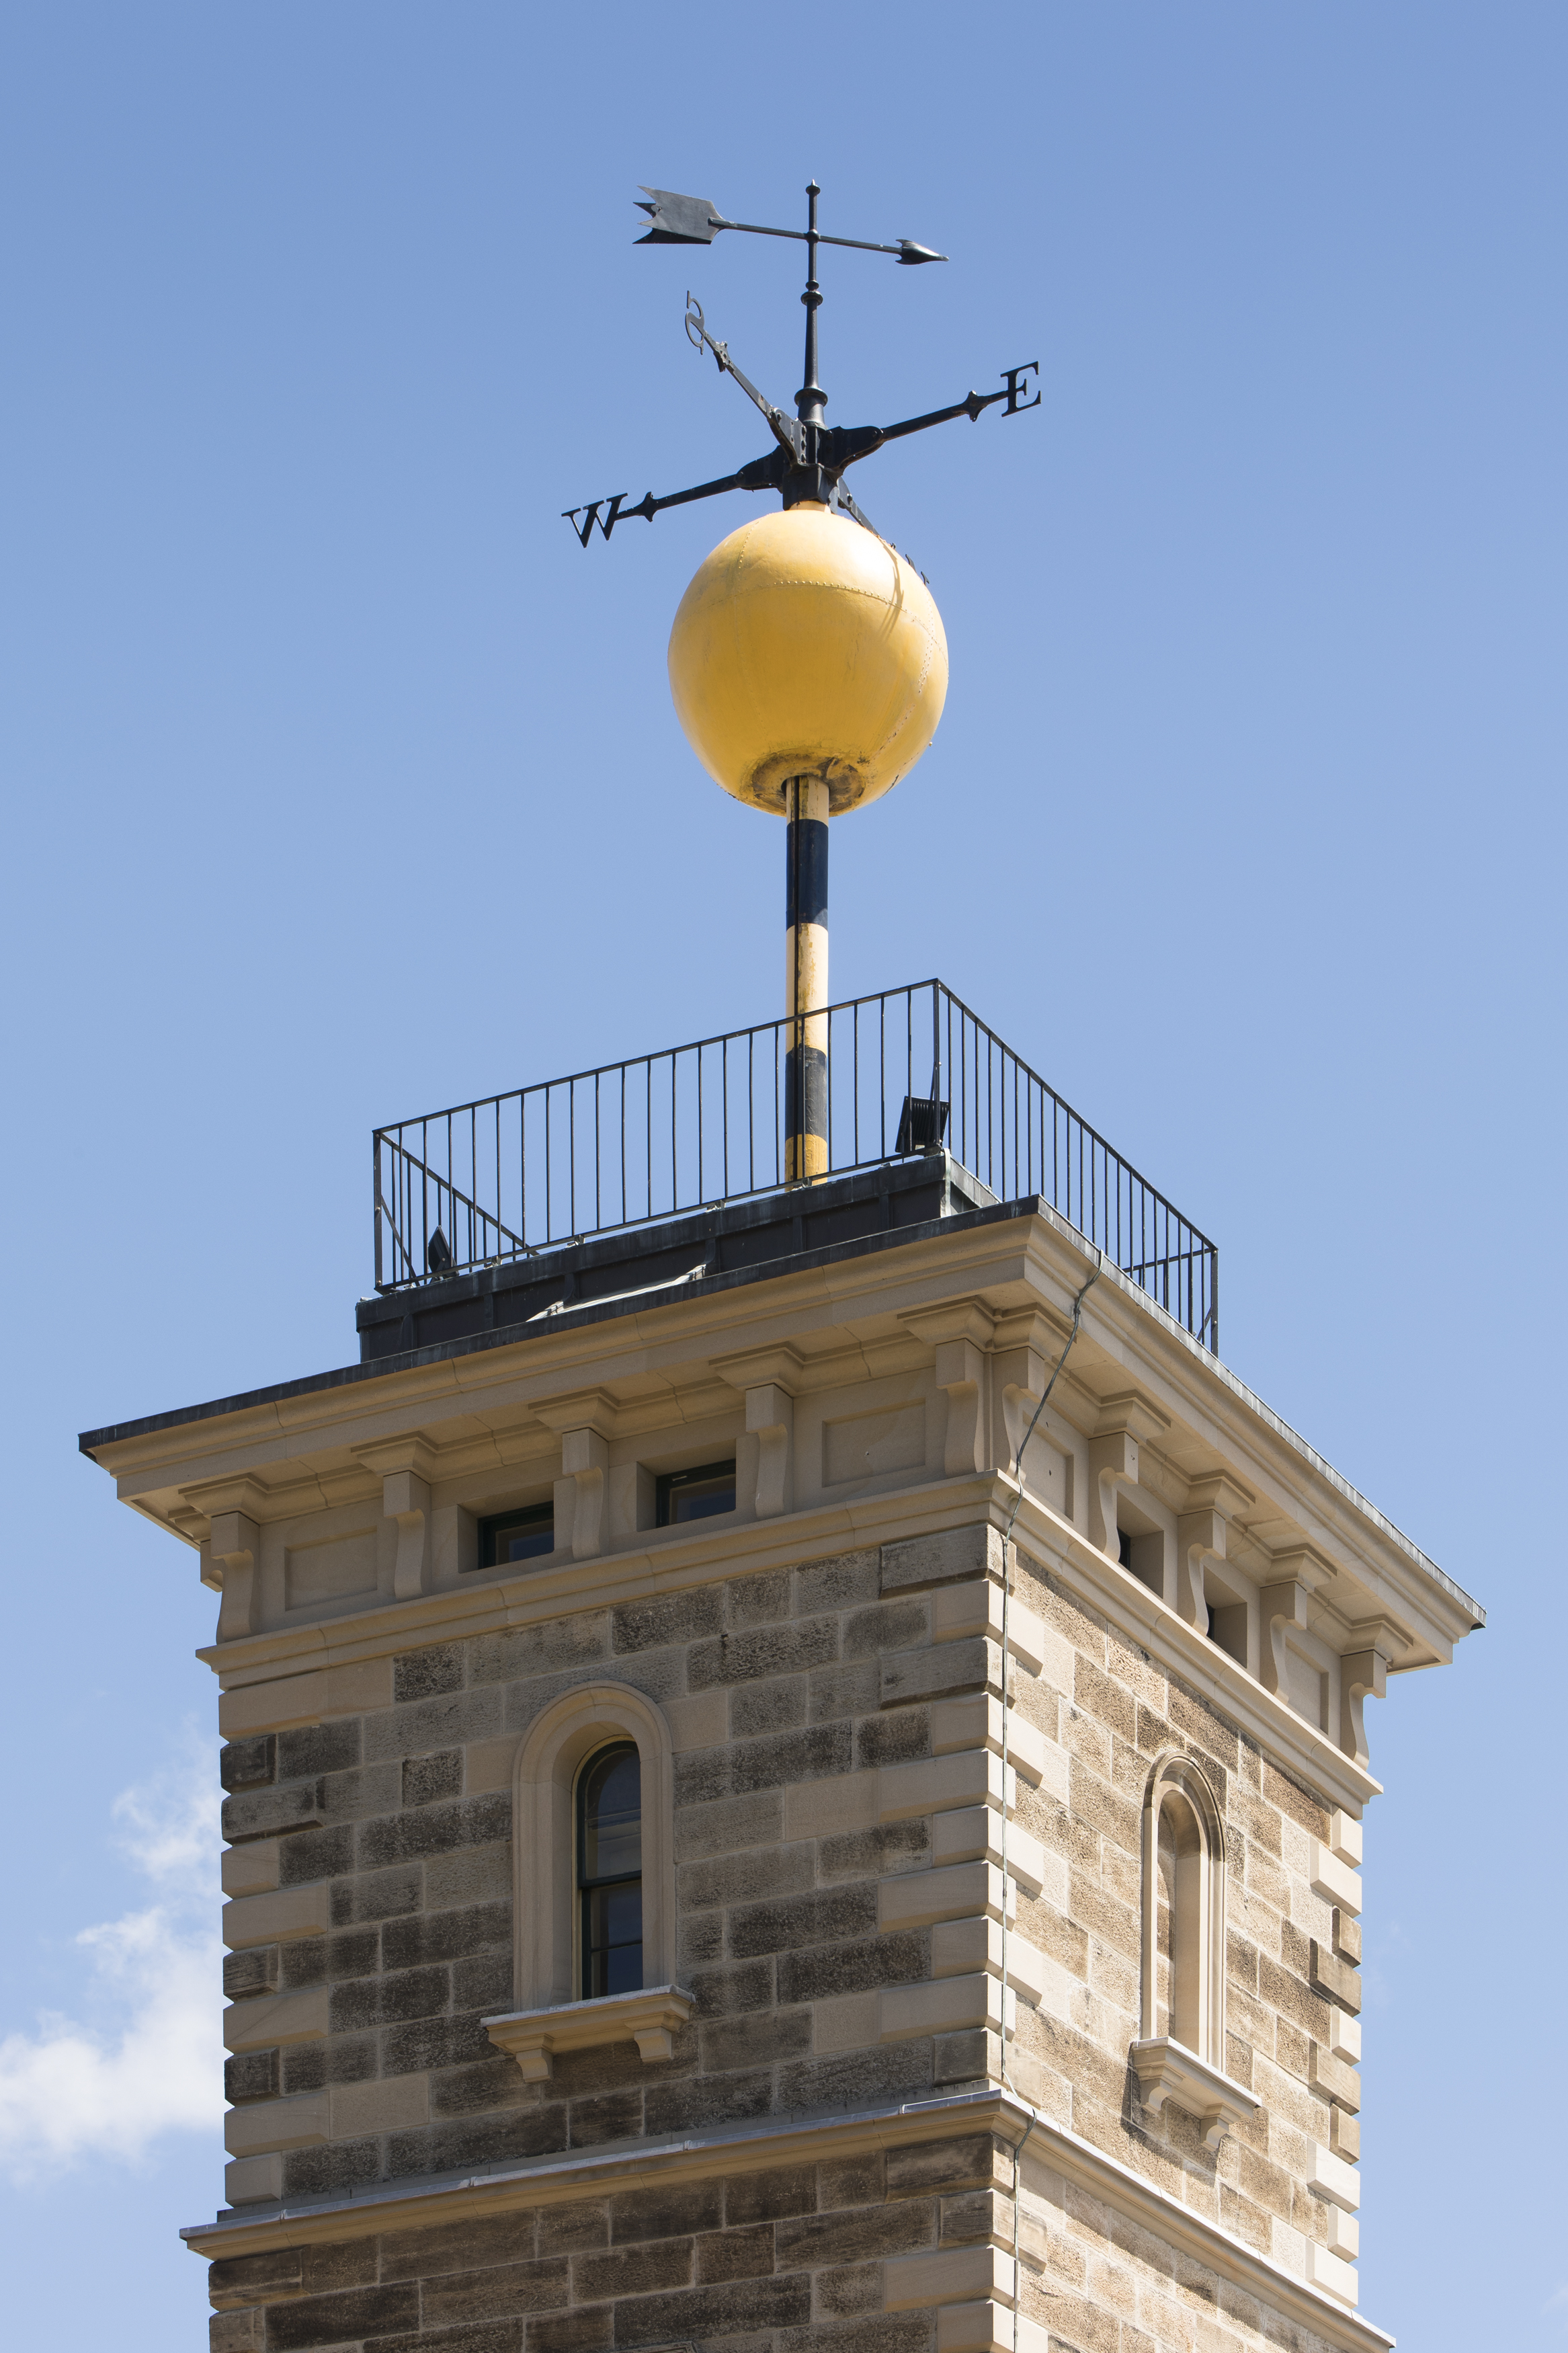 A large yellow metal call sitting on top of a sandstone tower with a weather vane above it.